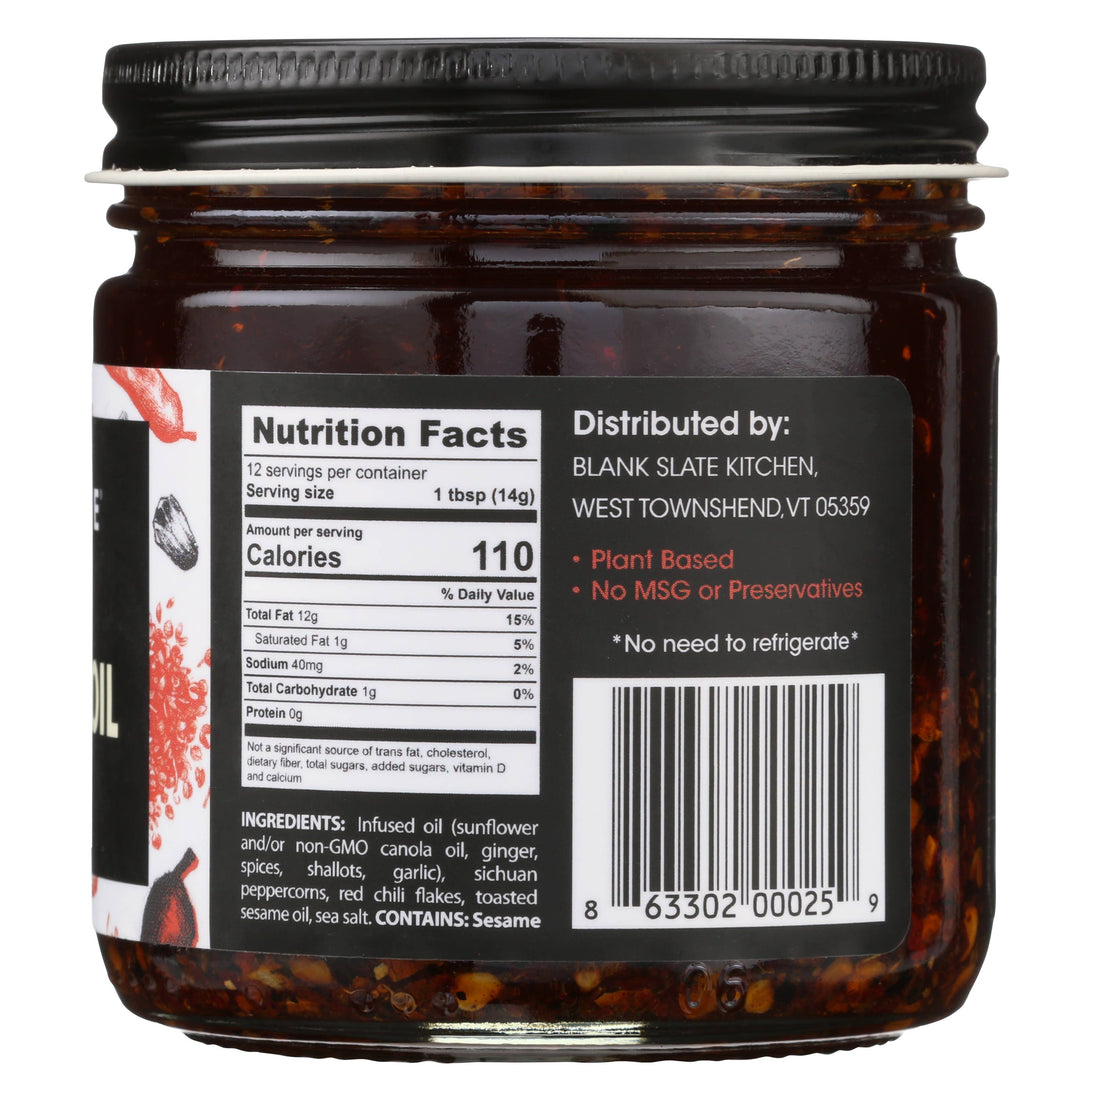 Sichuan Chili Oil - Authentic Chinese hot sauce